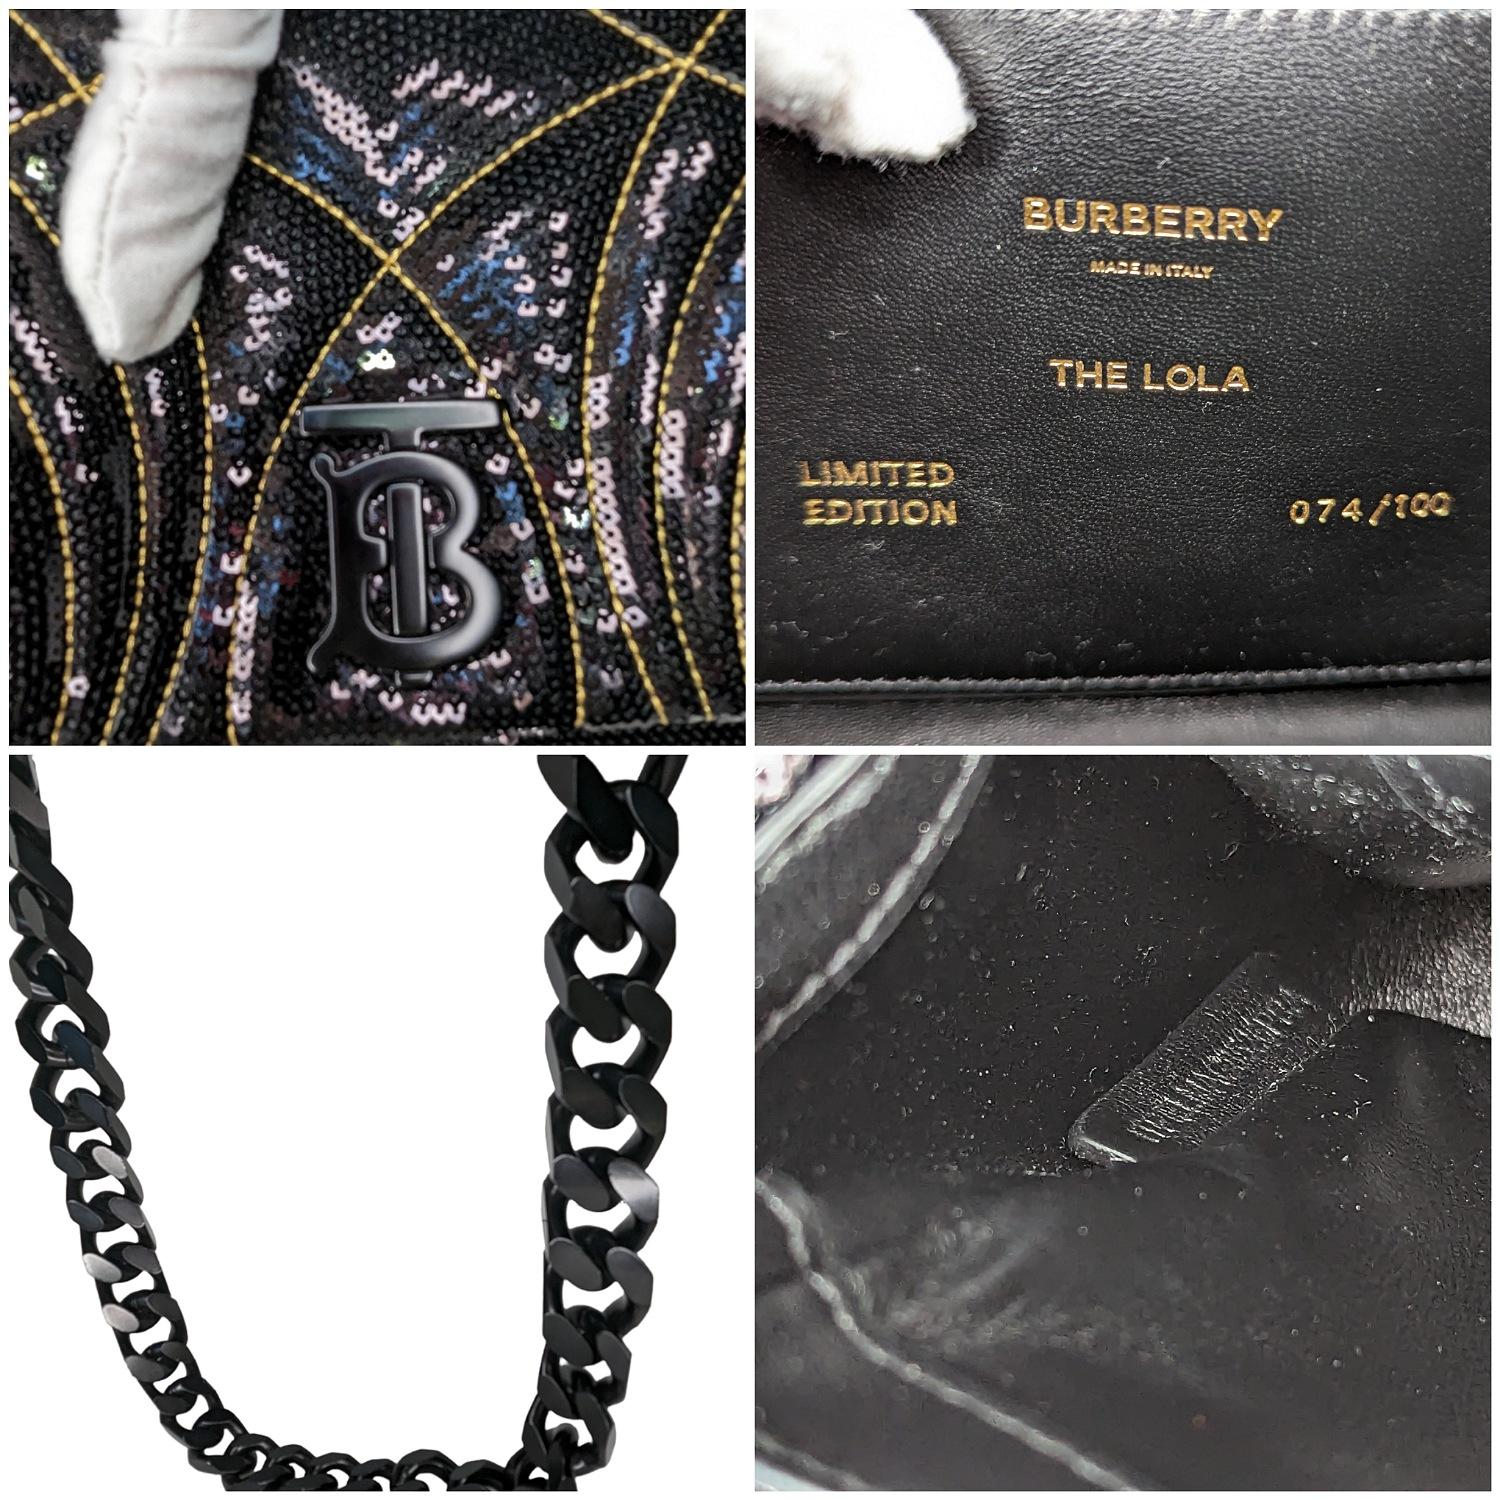 Burberry Lola Small Quilted Sequin Chain Shoulder Bag For Sale 3